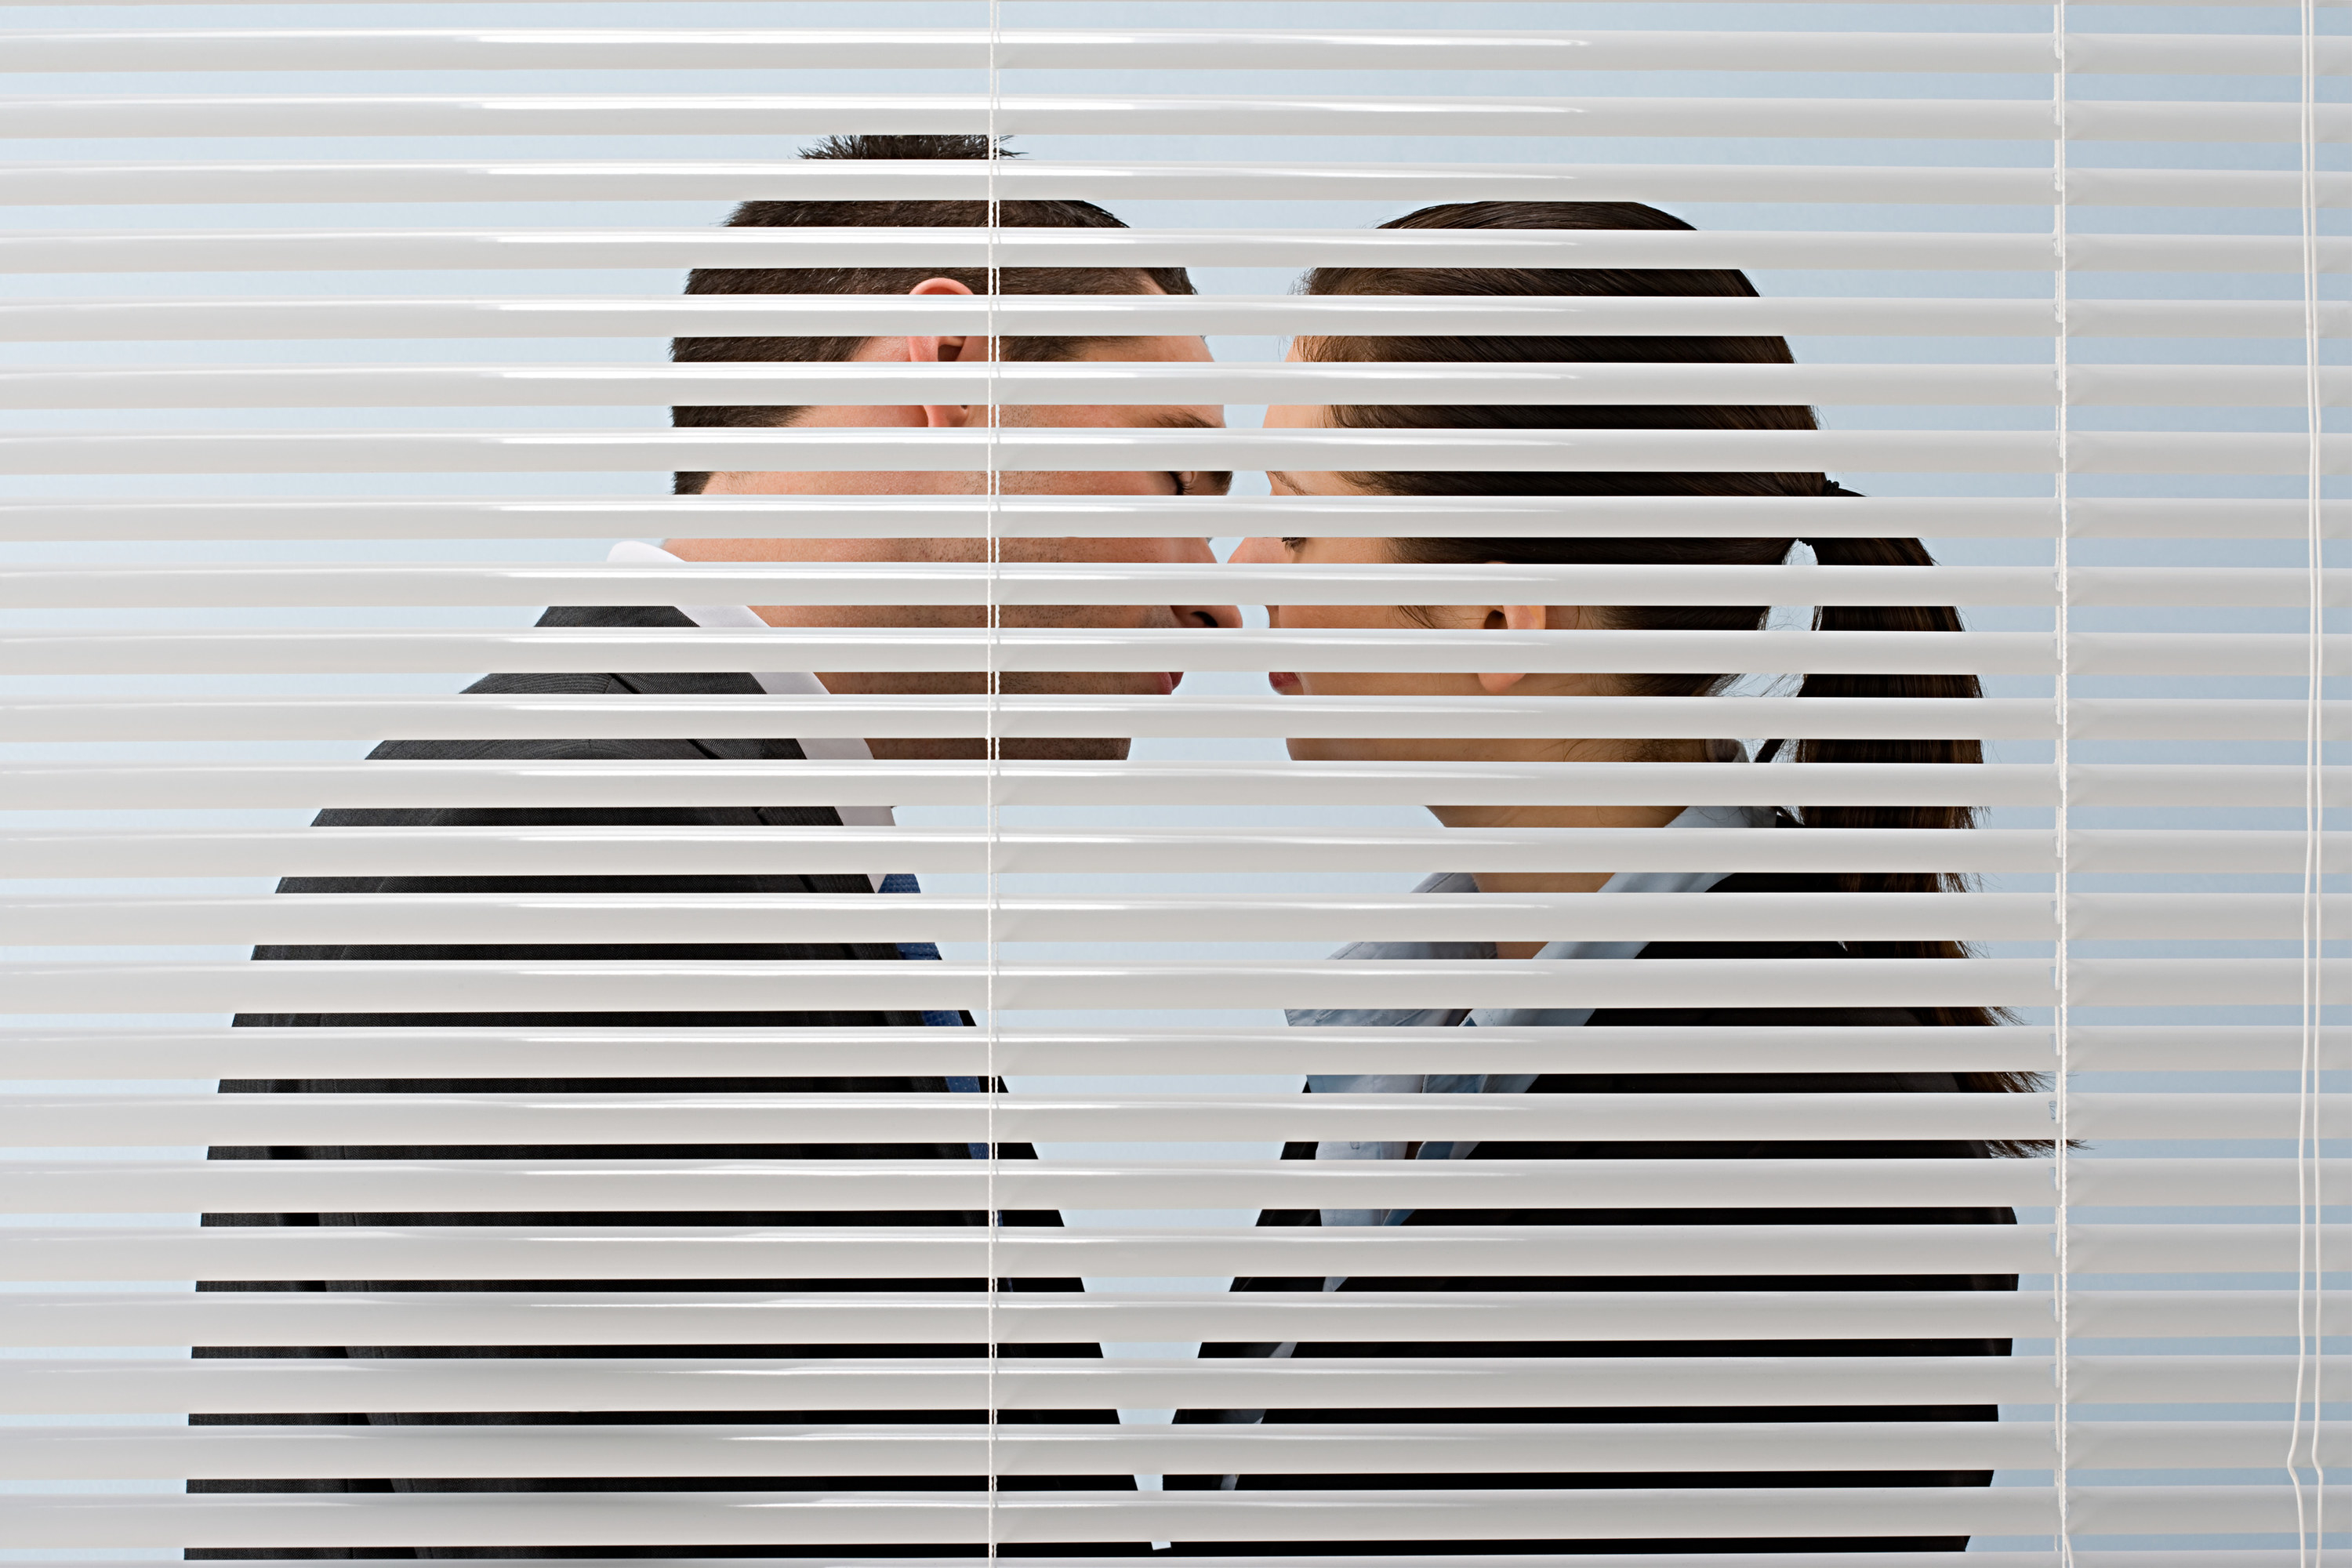 Two coworkers kiss behind the blinds of an office room